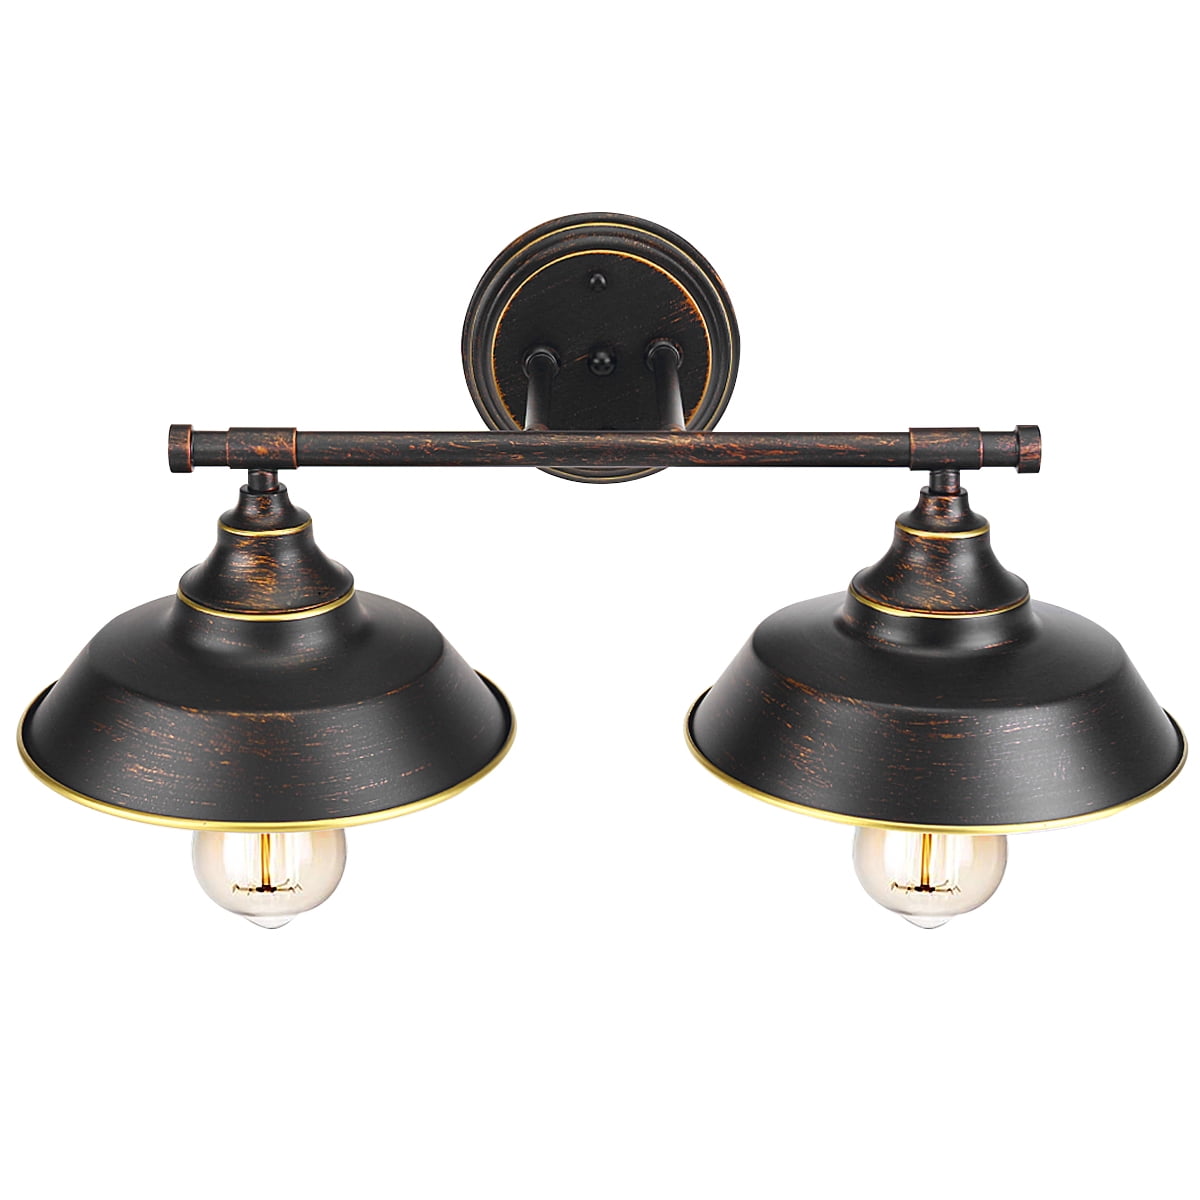 Brushed Phansthy Vintage Wall Light Fixtures with Globe Glass Shade 2 Lights Wall Sconces Lighting Switched Indoor Rustic Wall Lamps for Living Room Bathroom Vanity Mirror 